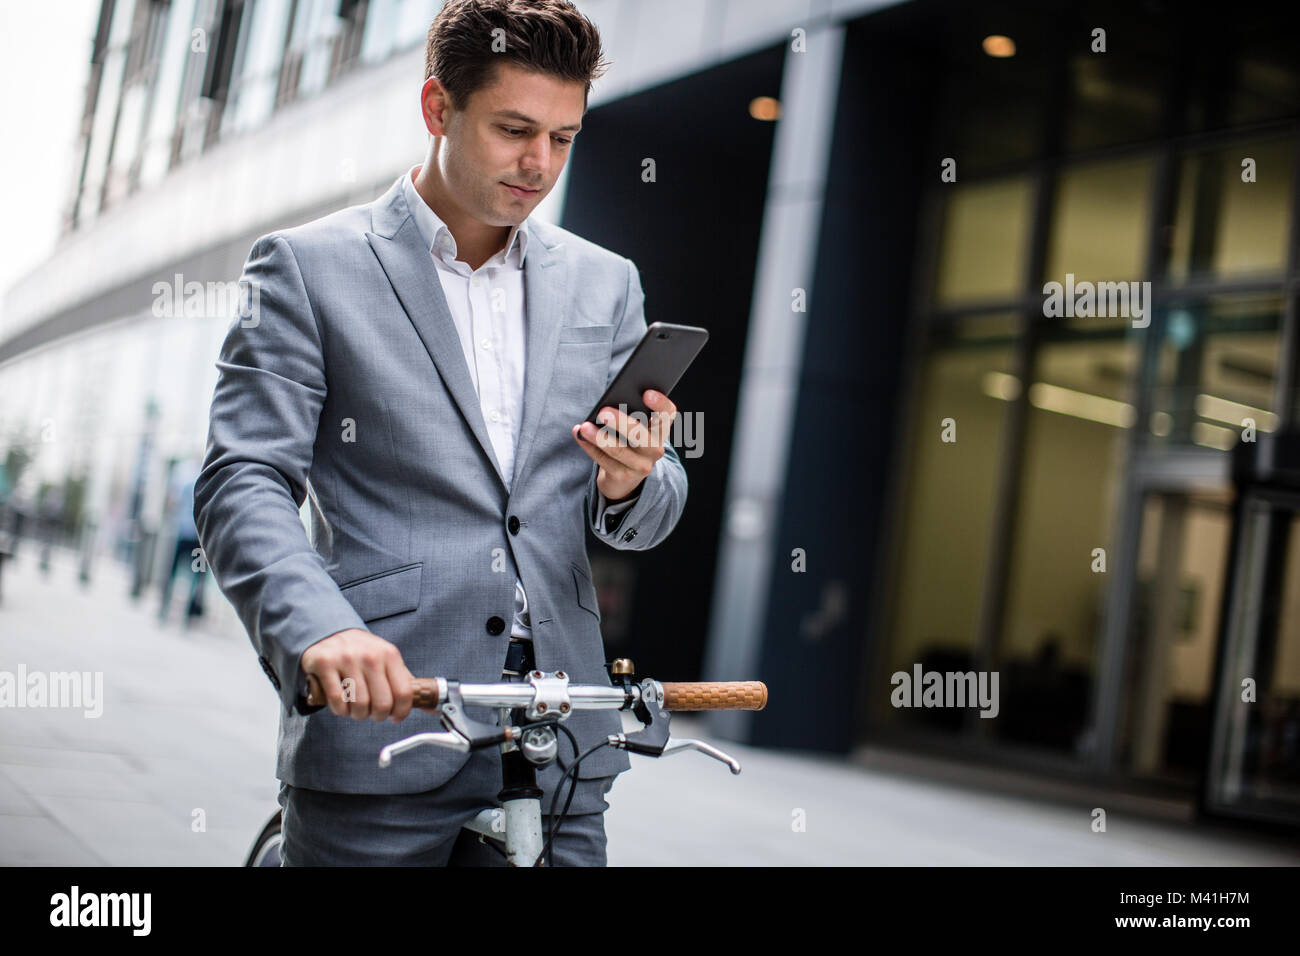 Businessman cycling to work using smartphone Stock Photo